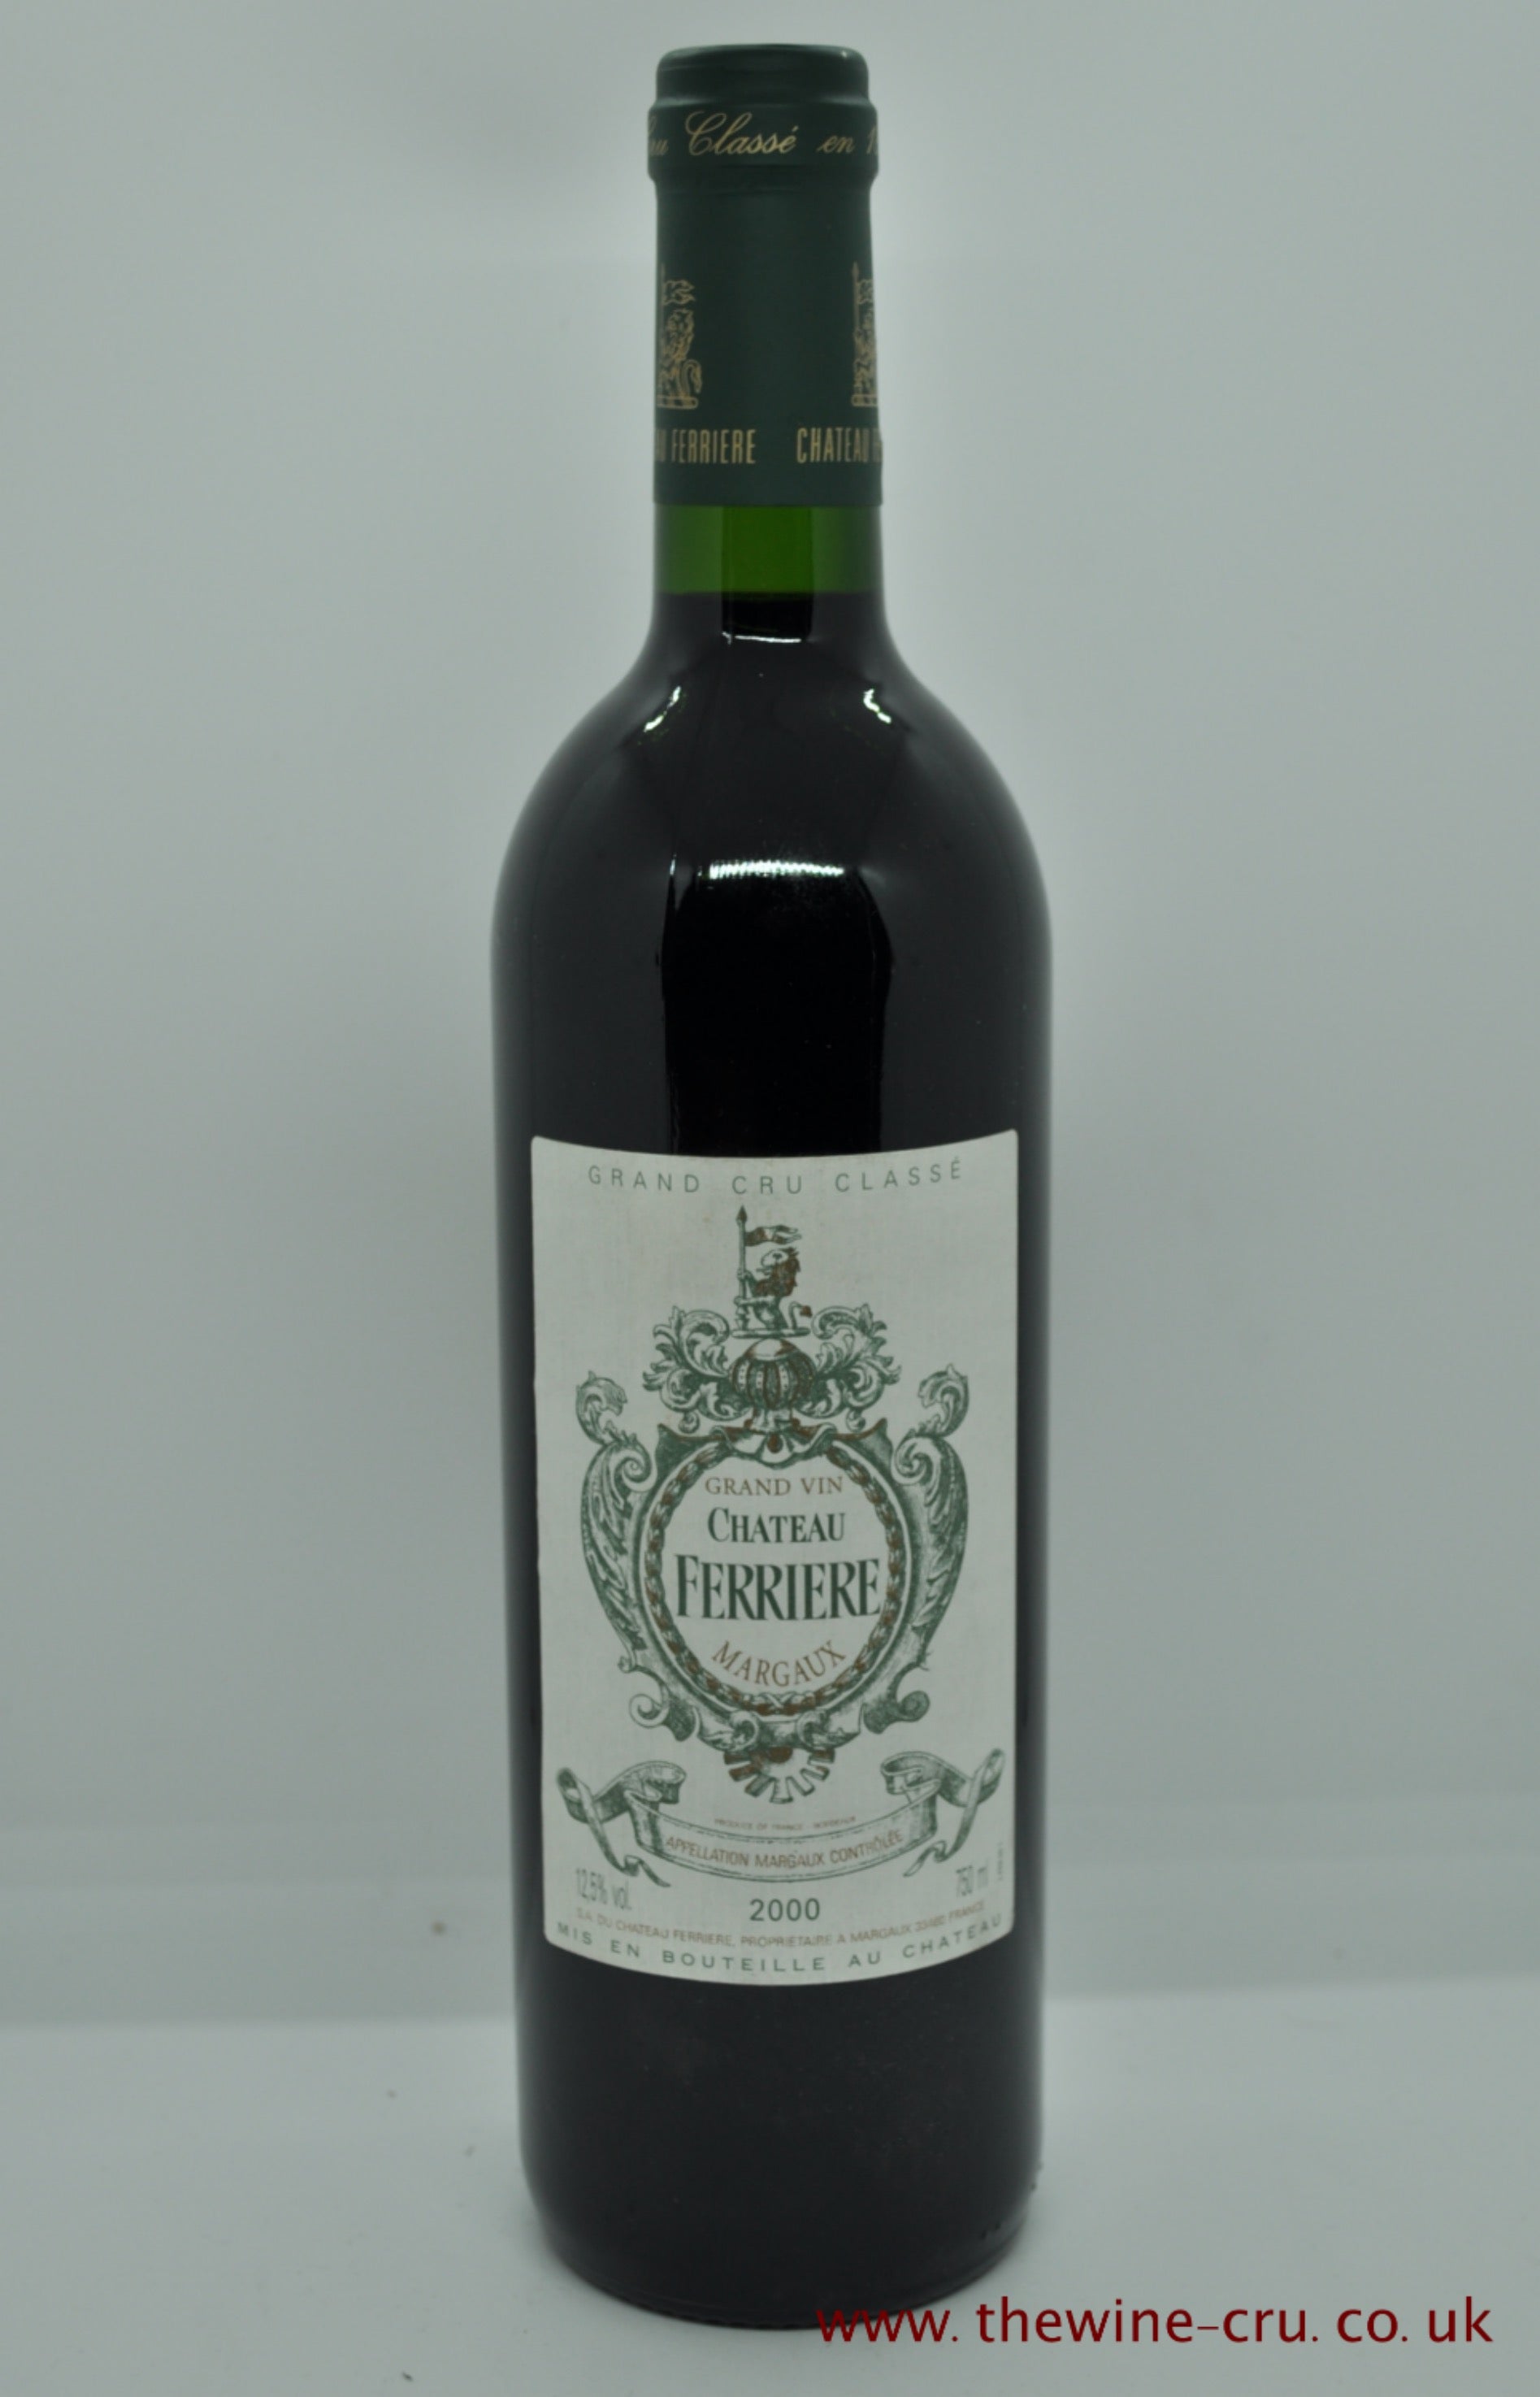 2000 vintage red wine. Chateau Ferriere 2000. France Bordeaux. Immediate delivery. Free local delivery. Gift wrapping available.